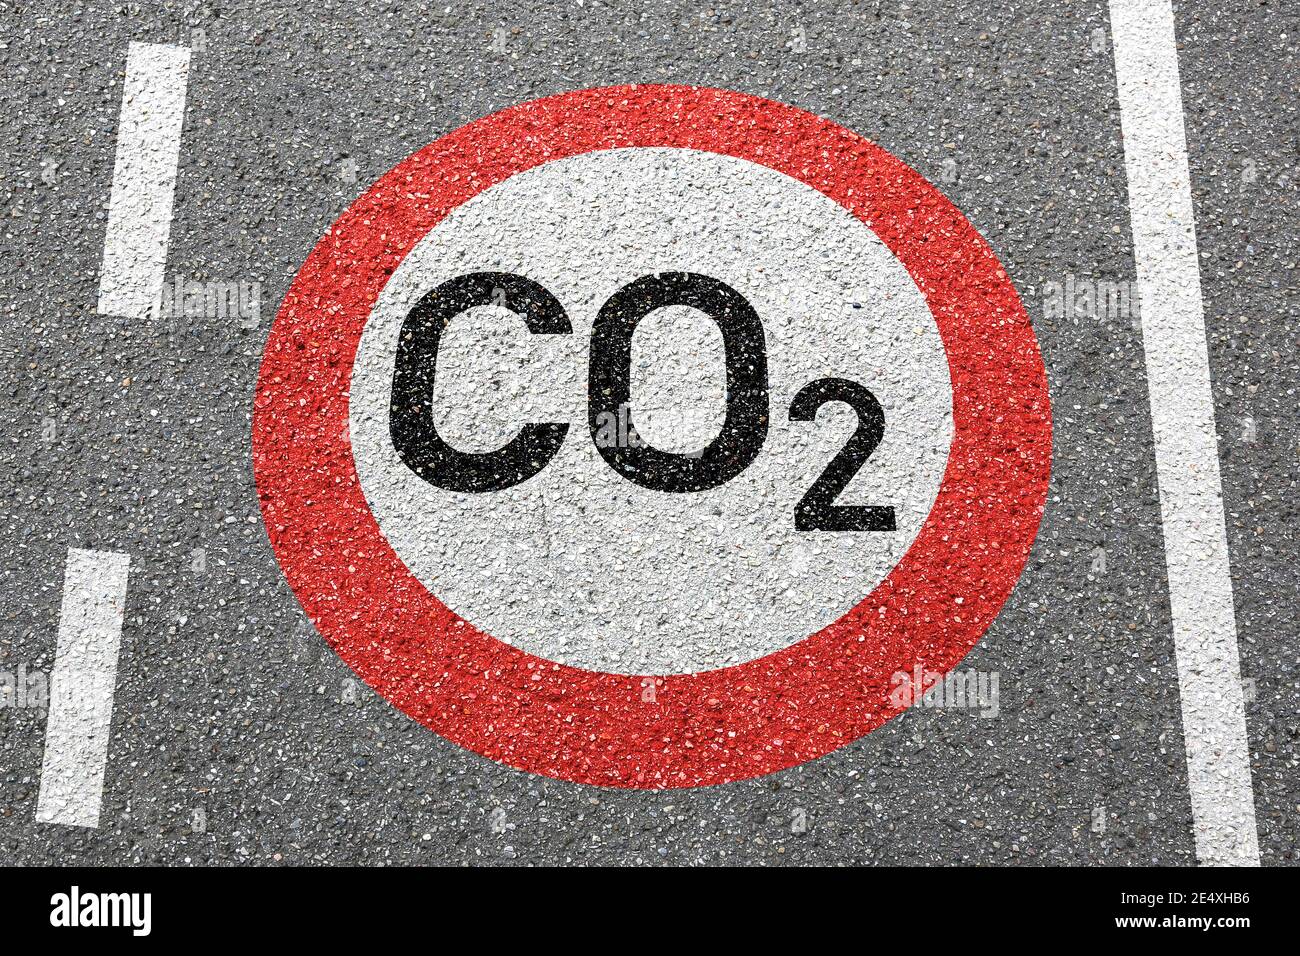 CO2 emissions emission Carbon dioxide air pollution reduction street road sign zone concept Stock Photo